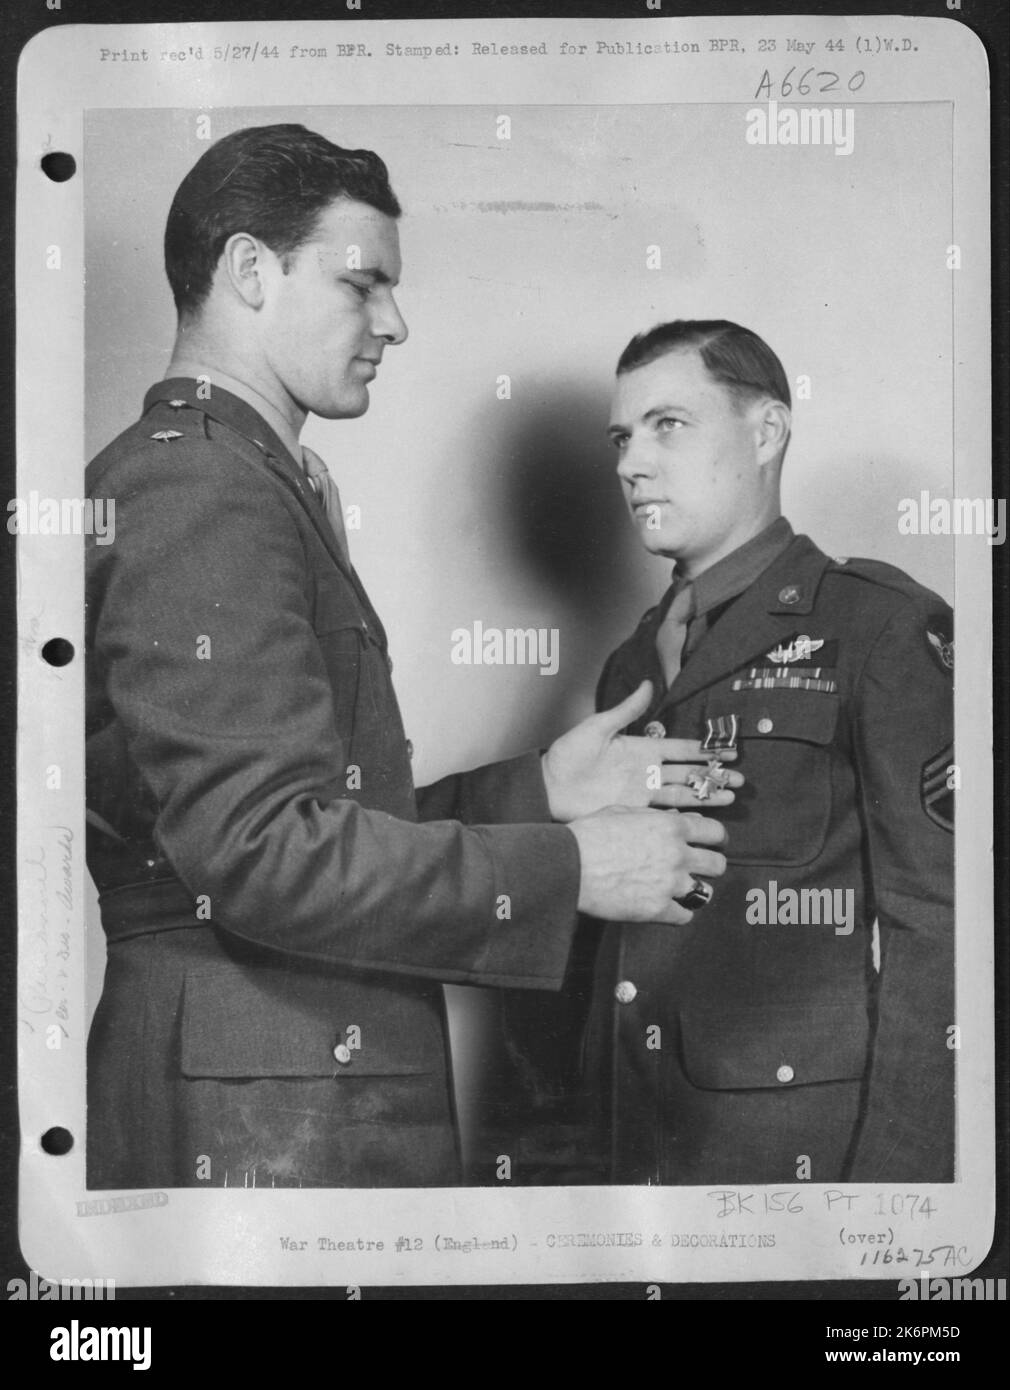 S/Sgt. George W. Williams Of 2429 N. Troy St., Chicago, Ill., A Ninth Air Force Gunner, Receives The Distinguised Flying Cross From His Marauder Squadron Commander, Lt. Colonel Othel D. Turnerof Sapulpa, Oklahoma. Stock Photo